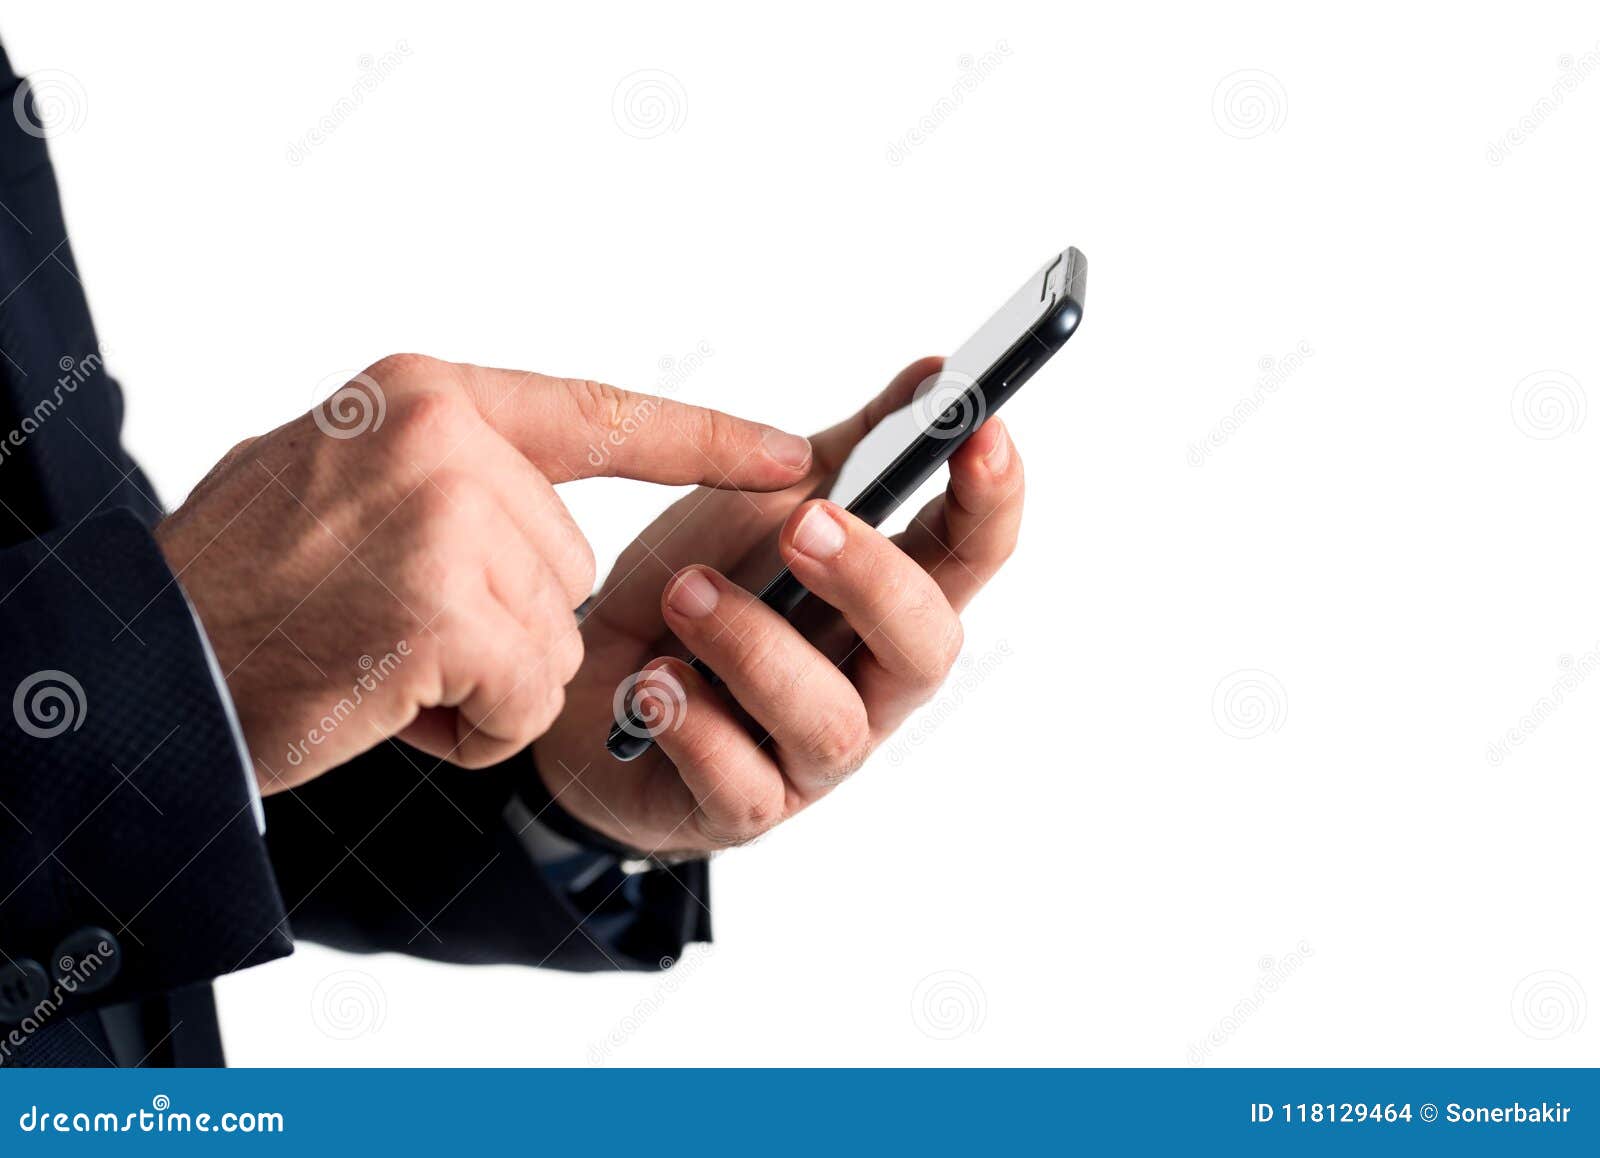 Hand With Smartphone Isolated On White Background Stock Photo - Image ...